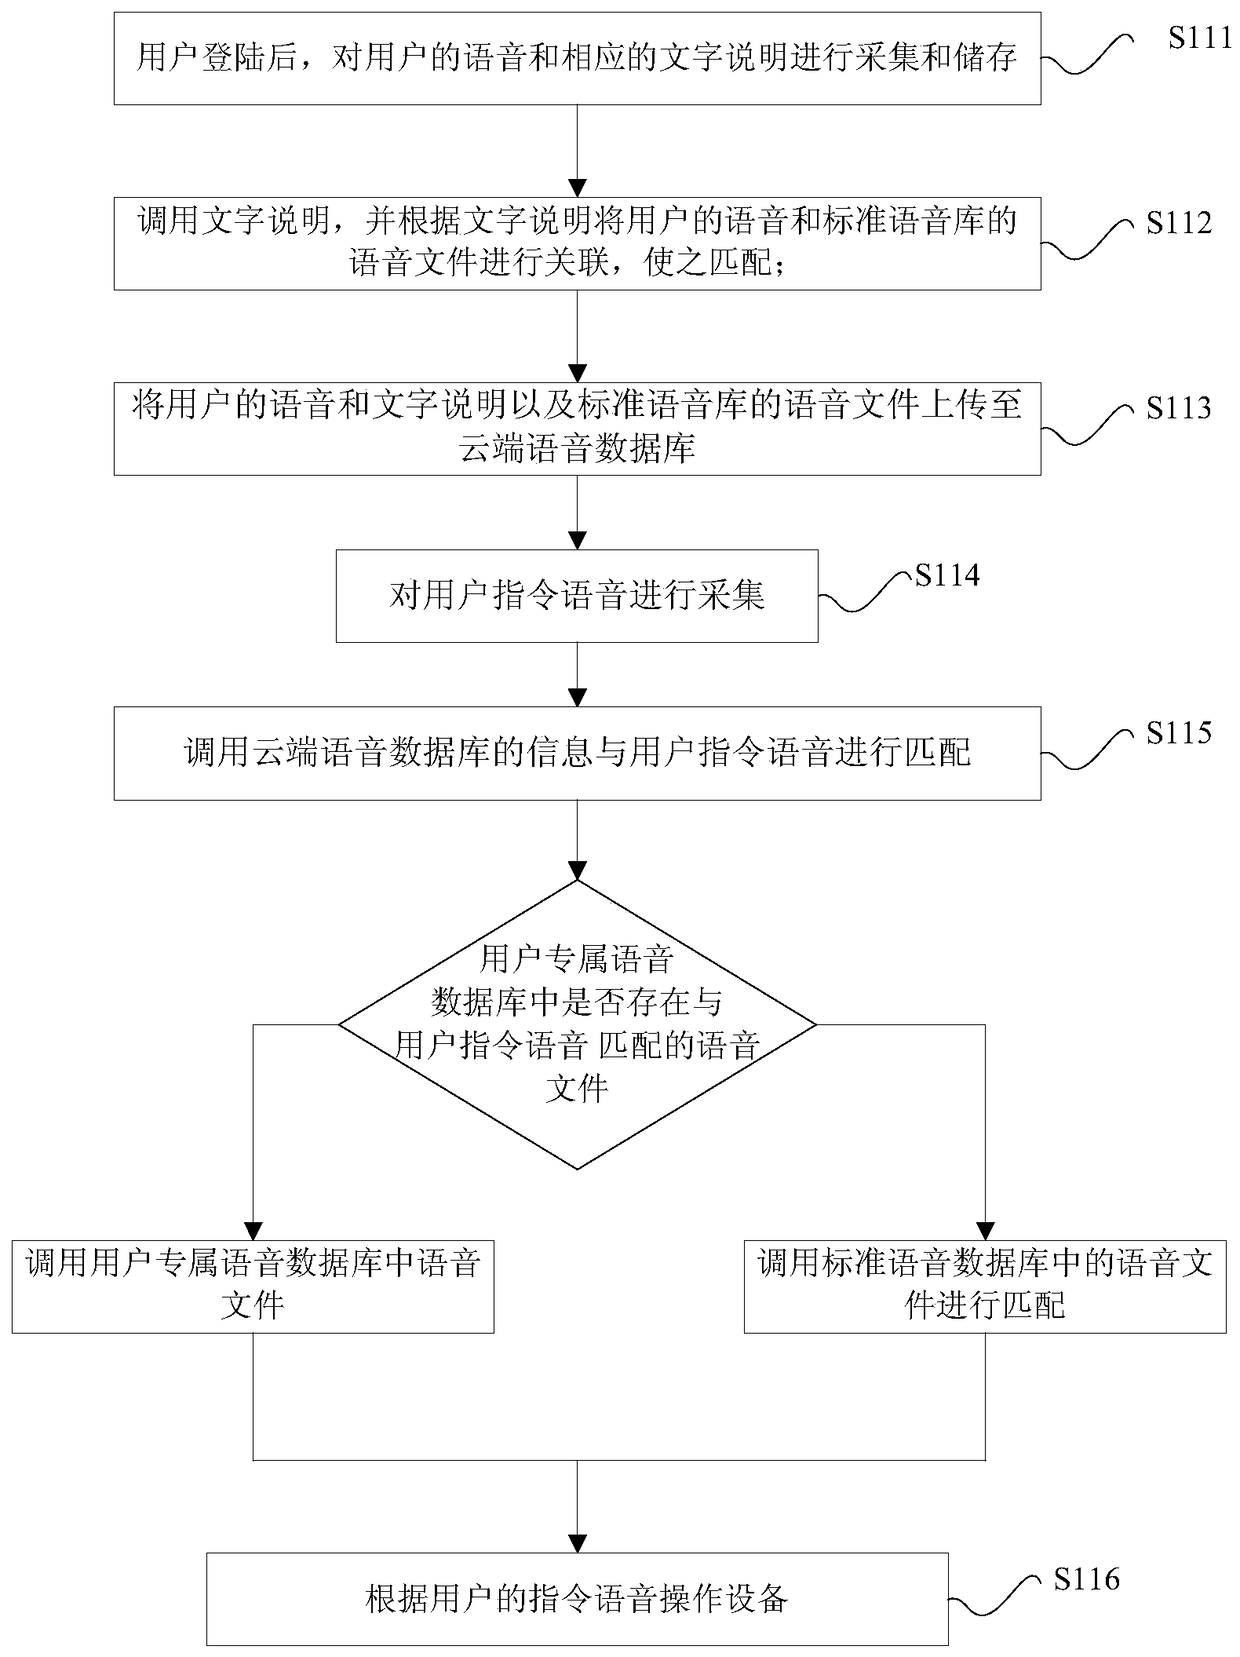 A speech recognition method and system